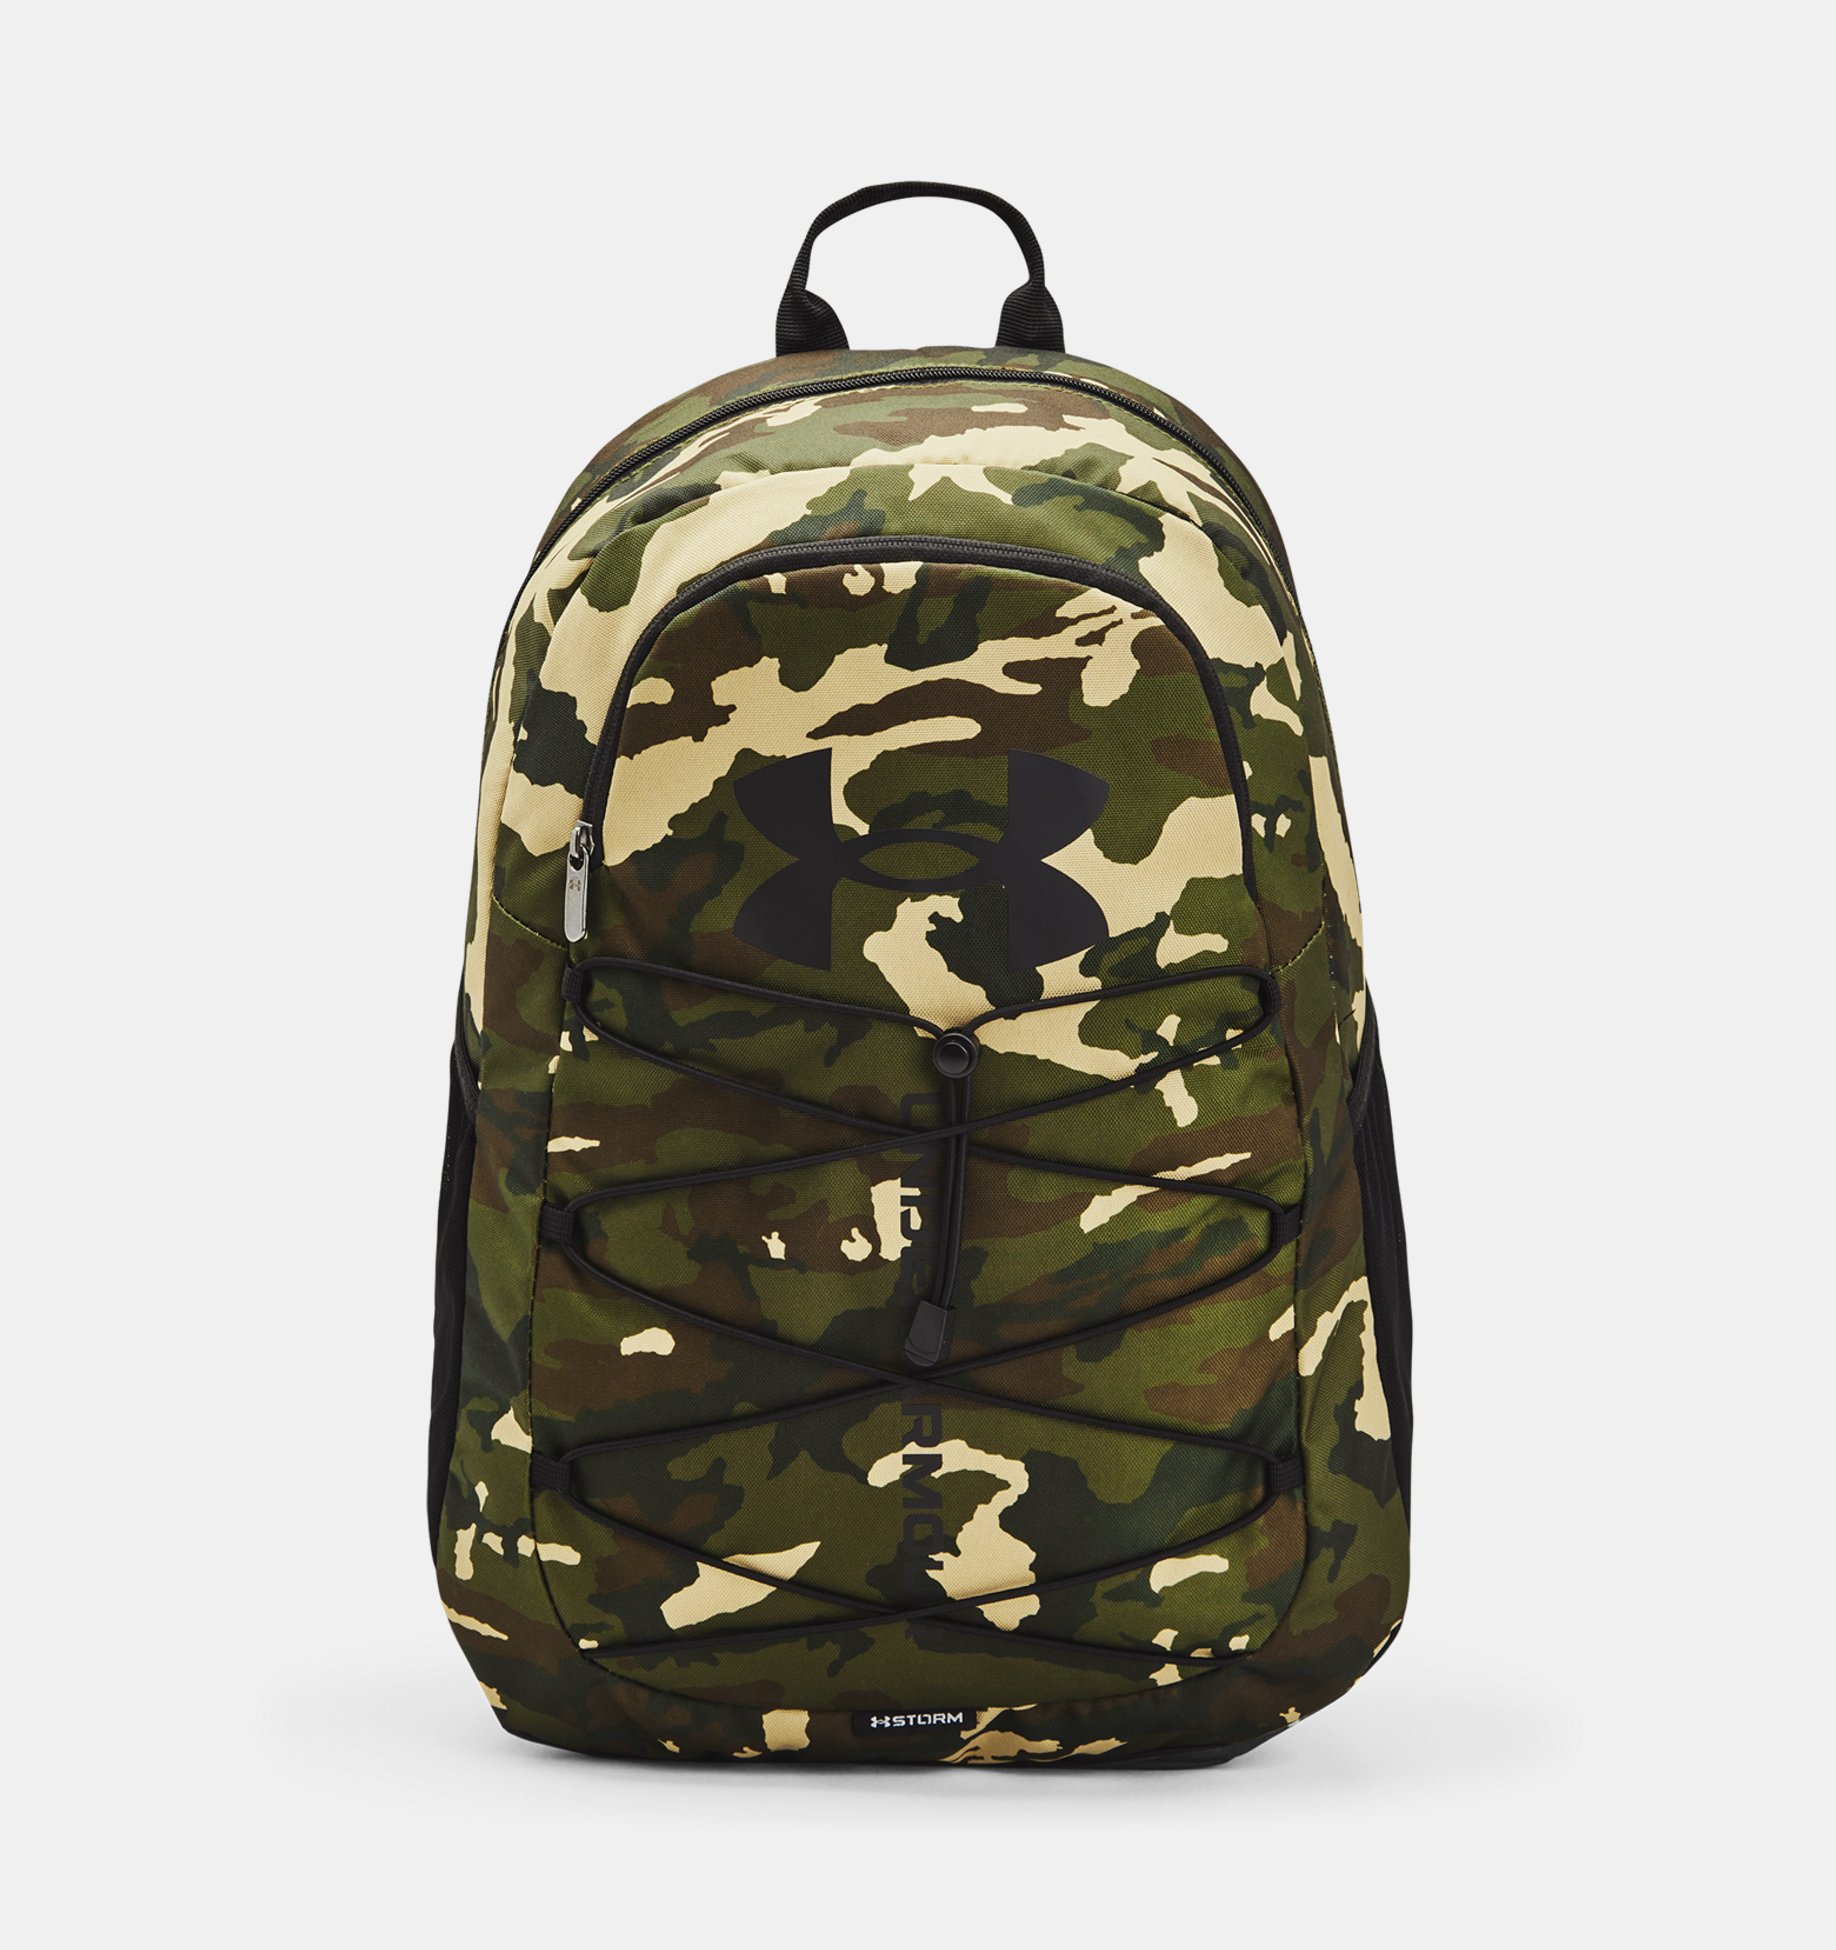 Under Armour UA Hustle Sport Backpack (various colors) $23 + free shipping